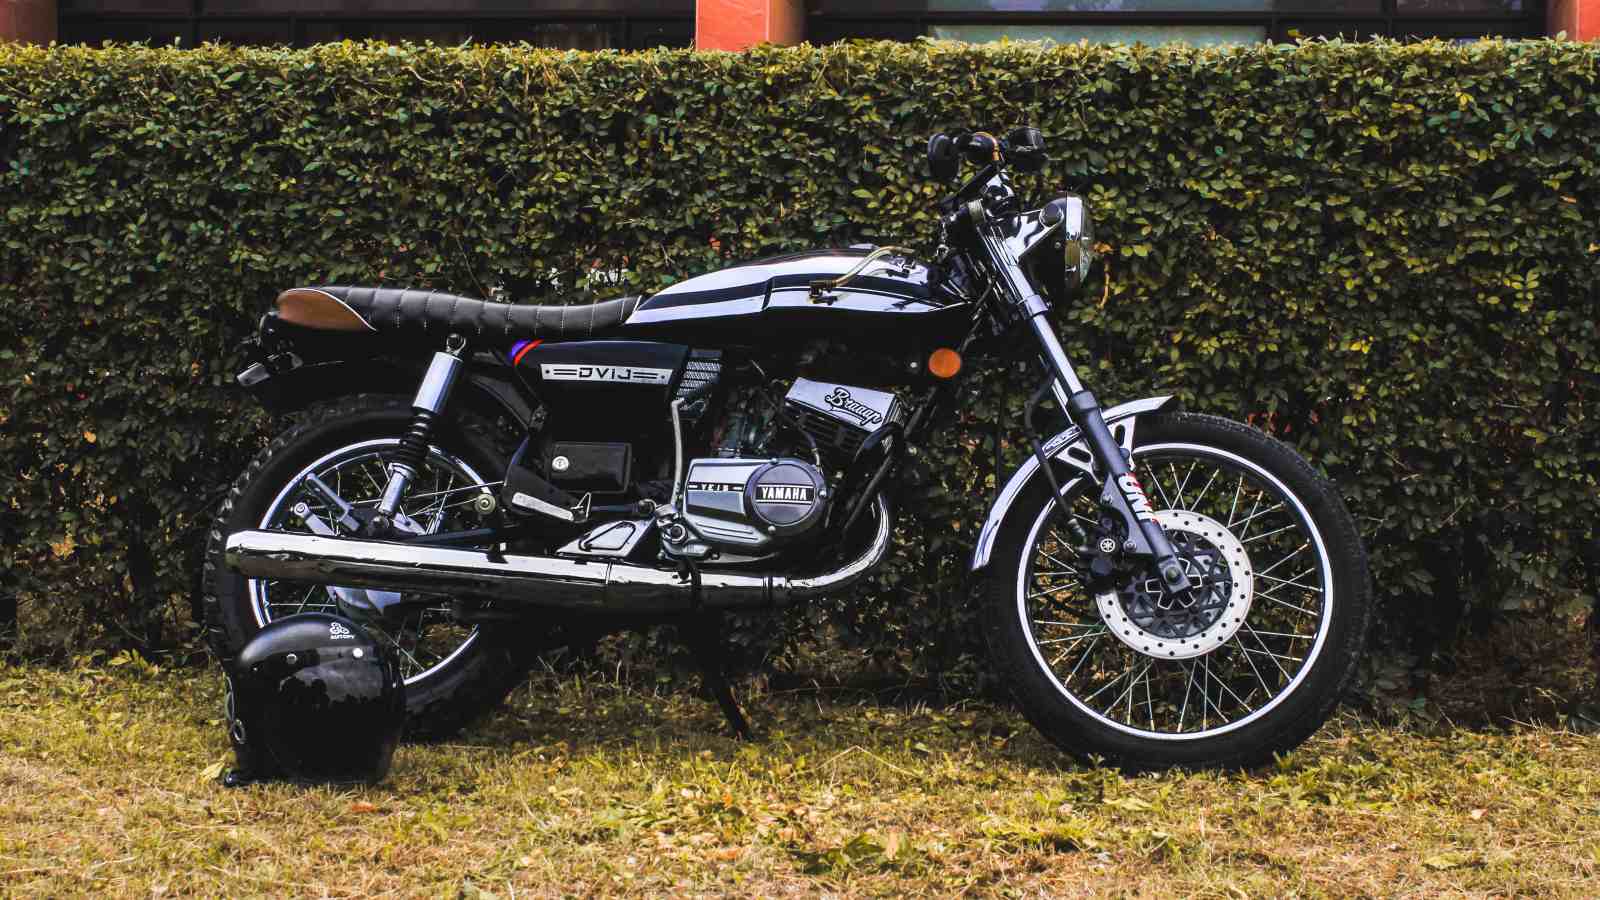 Customised Yamaha RX-100 Is Reborn As A Cafe Racer | Motoroids